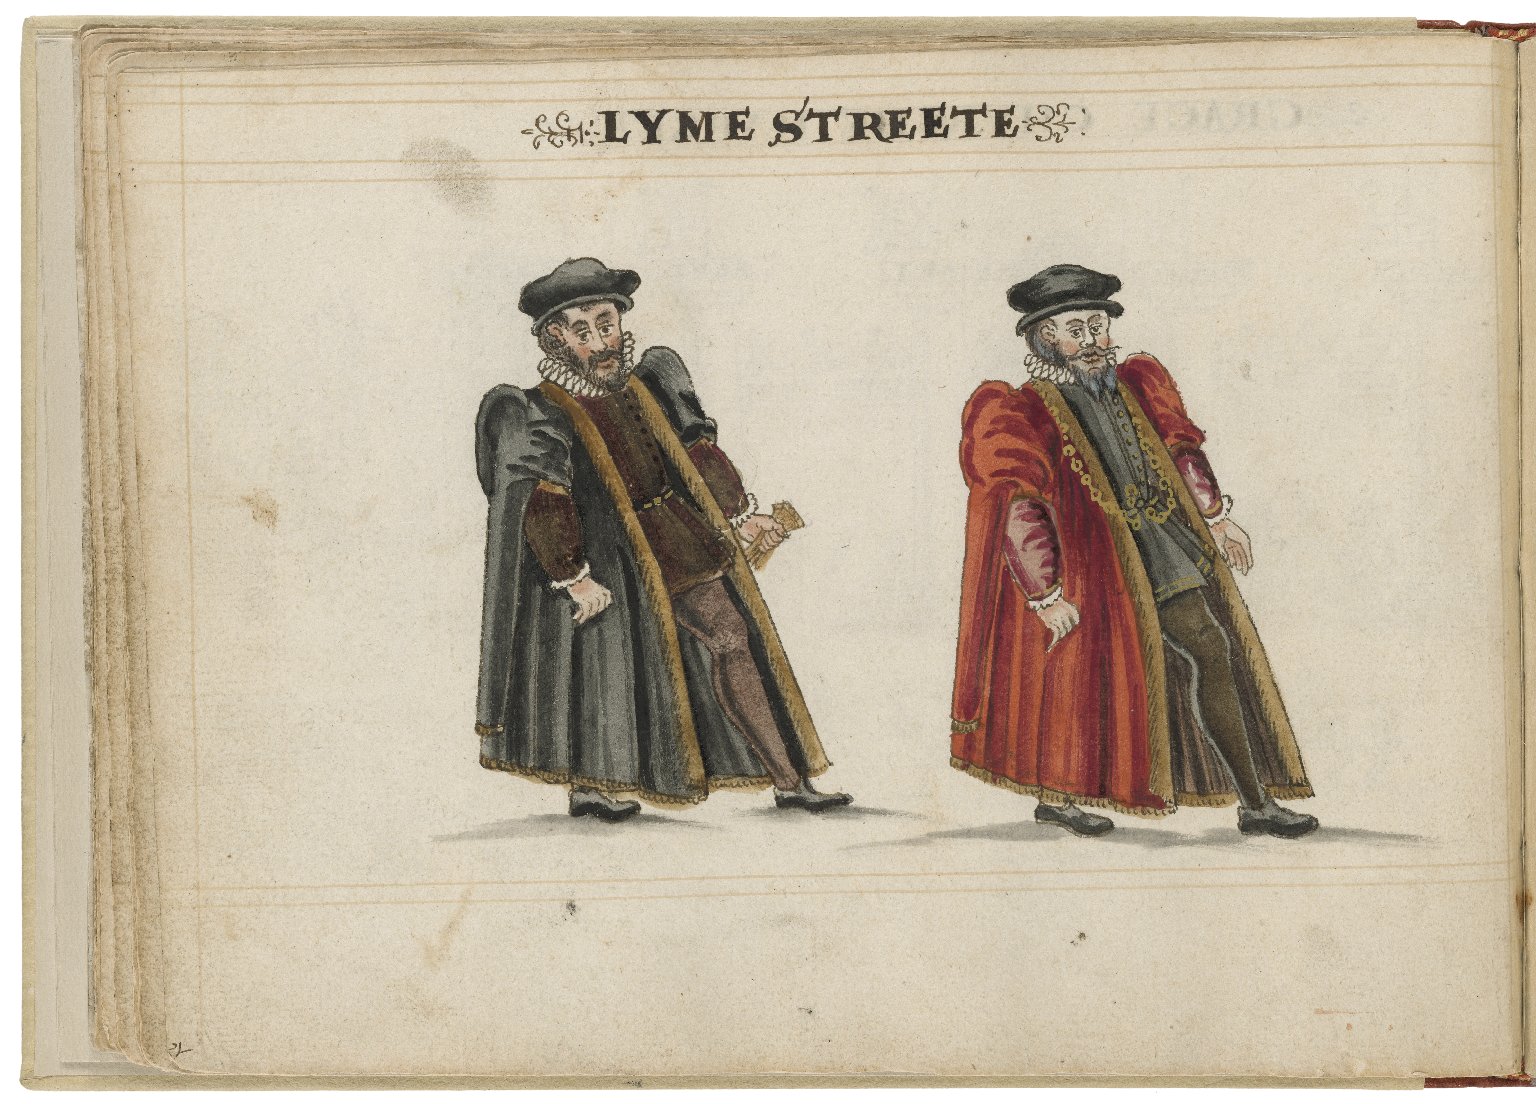 Watercolour painting of the alderman and deputy in charge of Lime Street Ward by Hugh Alley. Image courtesy of the Folger Digital Image Collection.